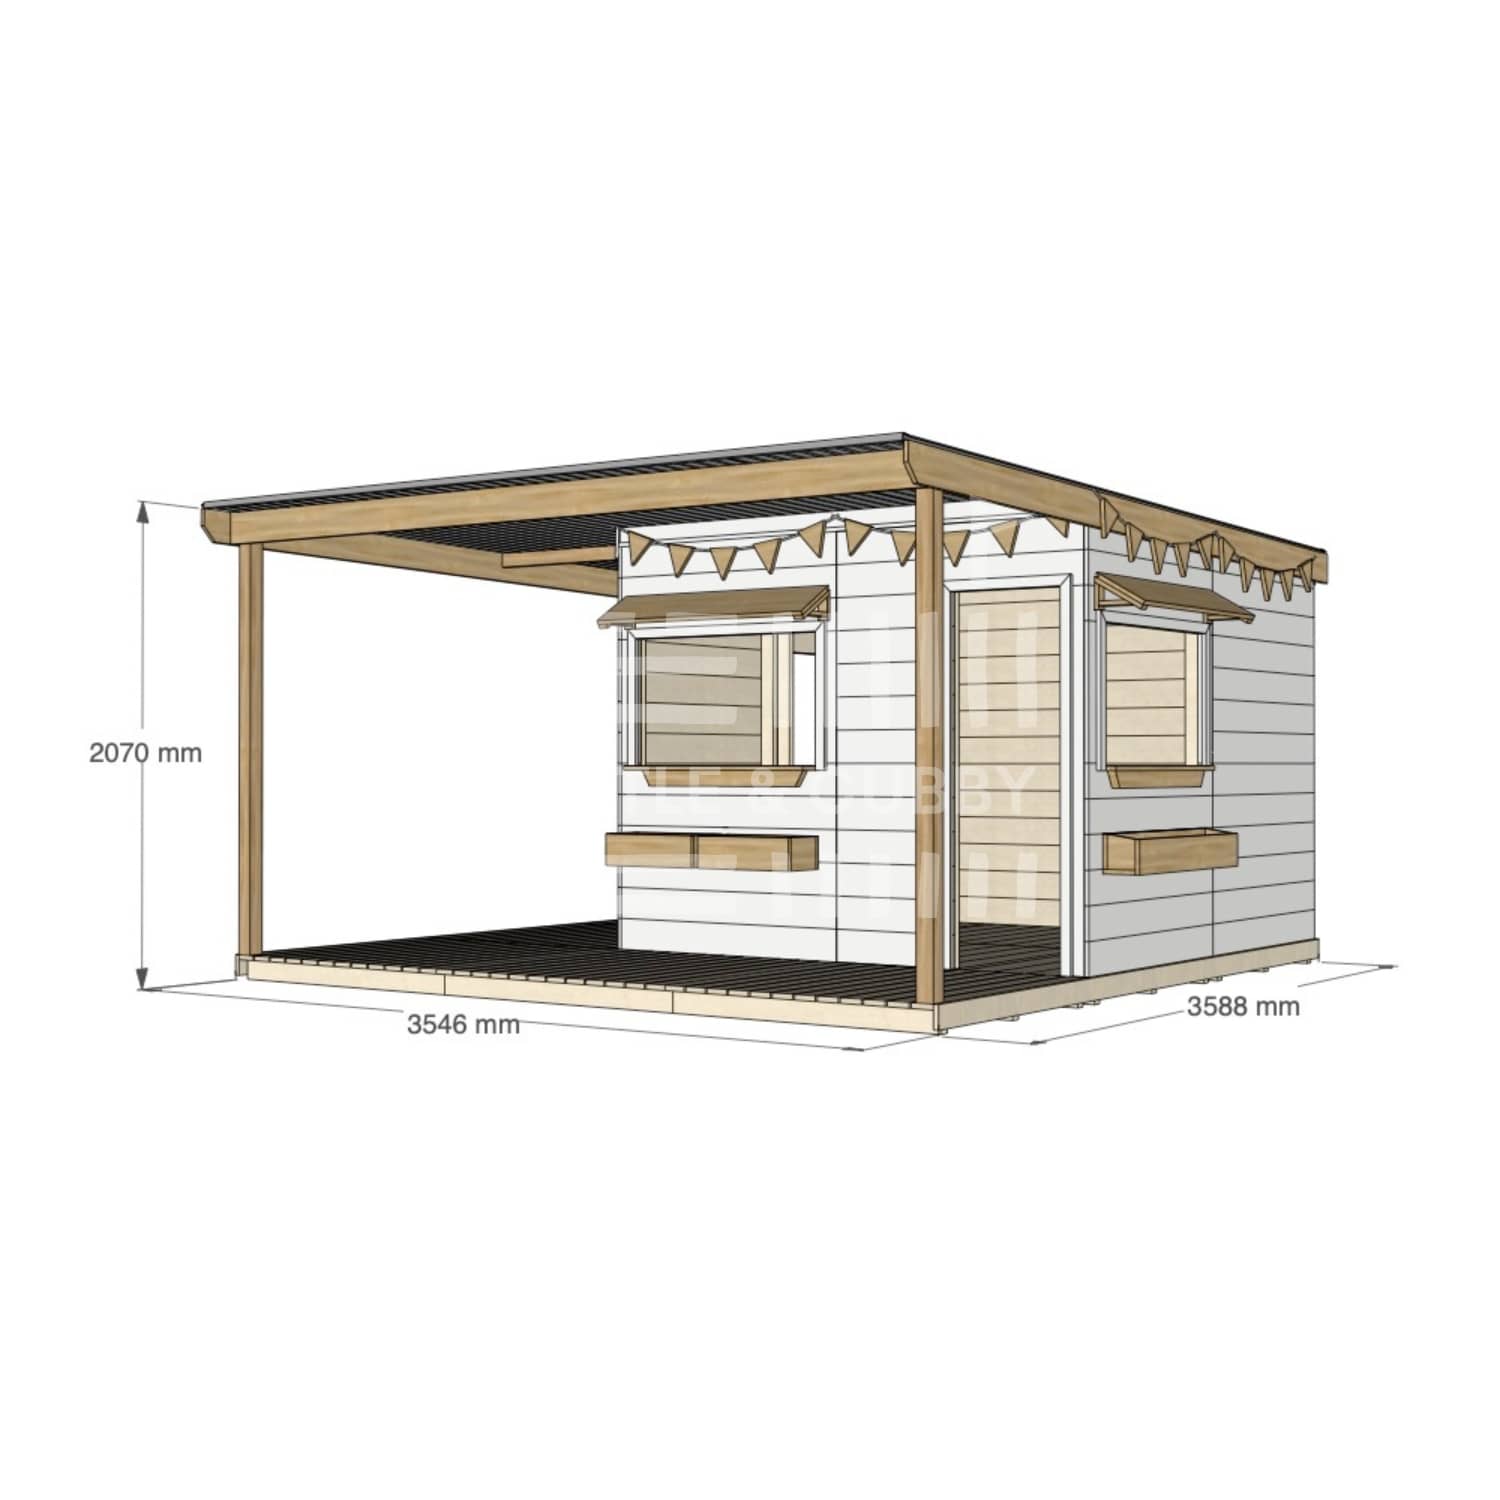 Commercial grade extended height painted large square timber cubby house with wraparound verandah and accessories